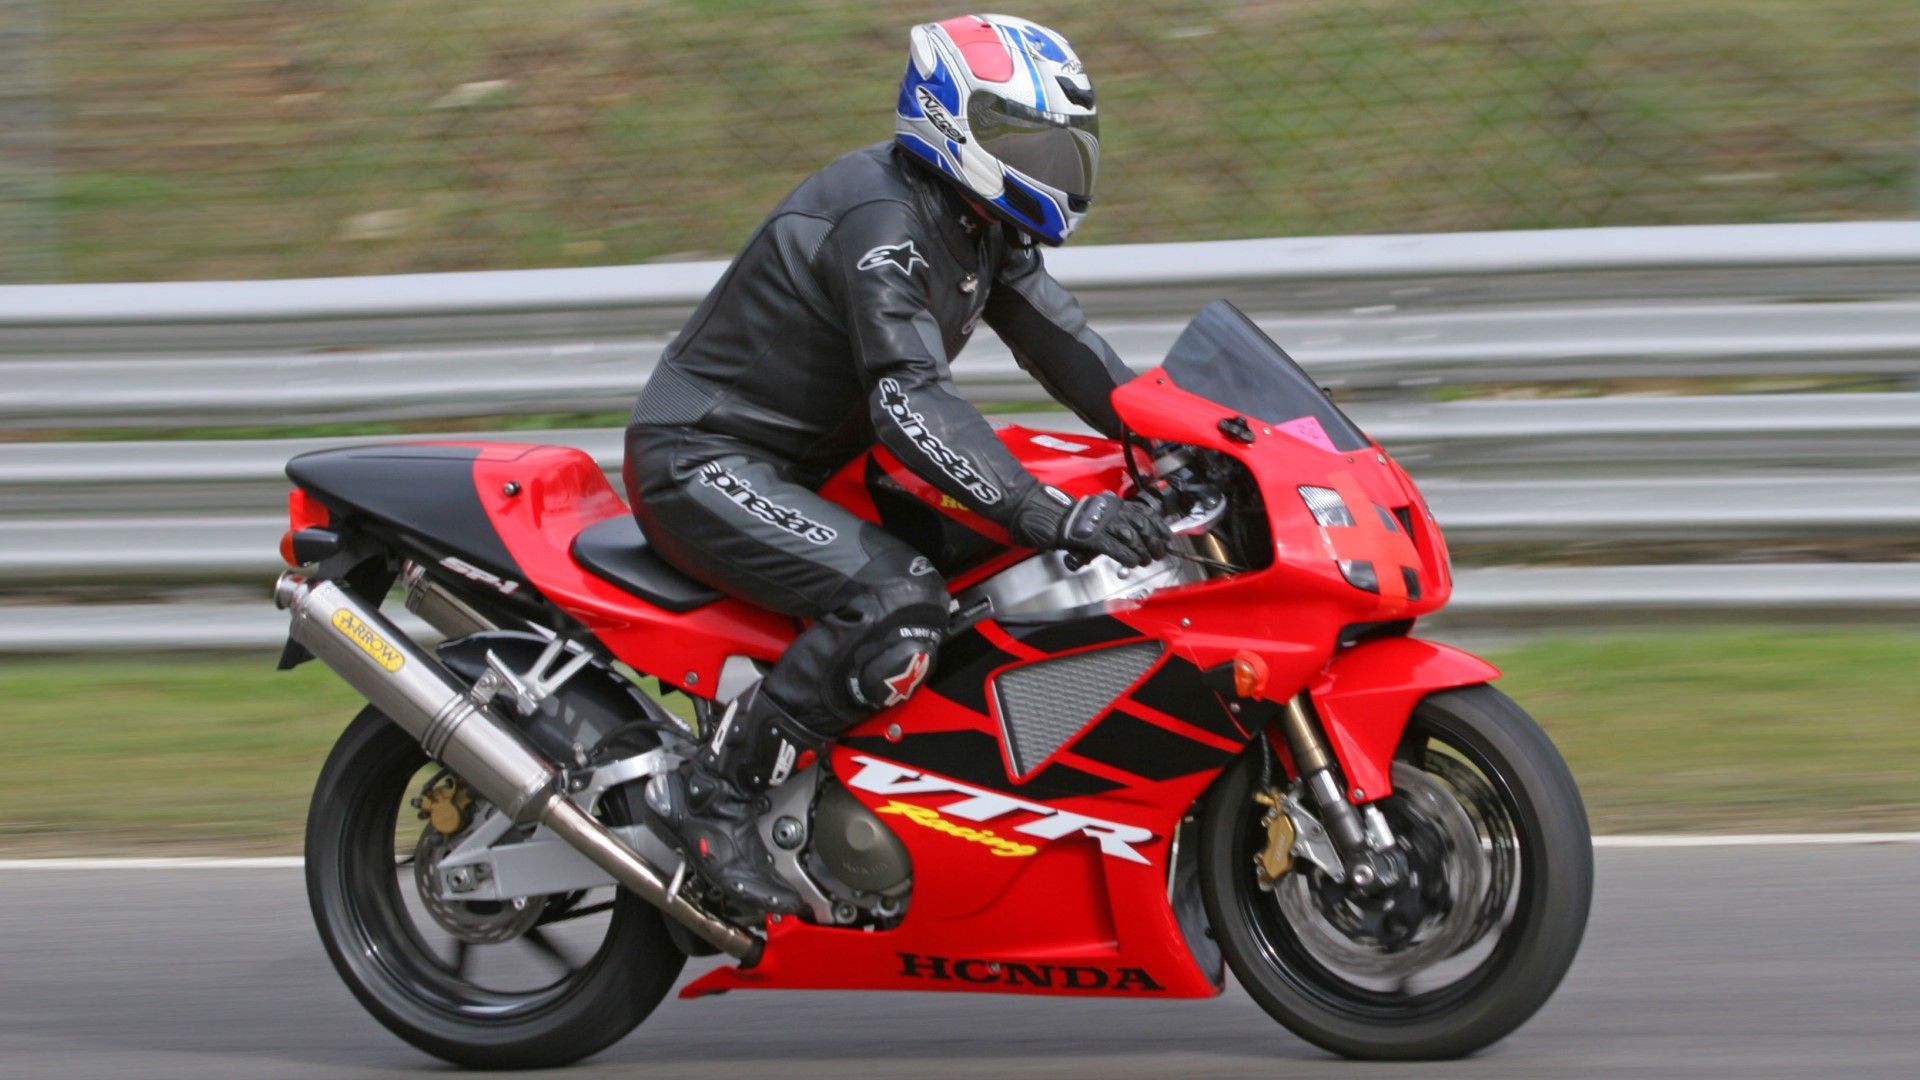 Honda VTR 1000 SP1 on a racetrack accelerating side profile view